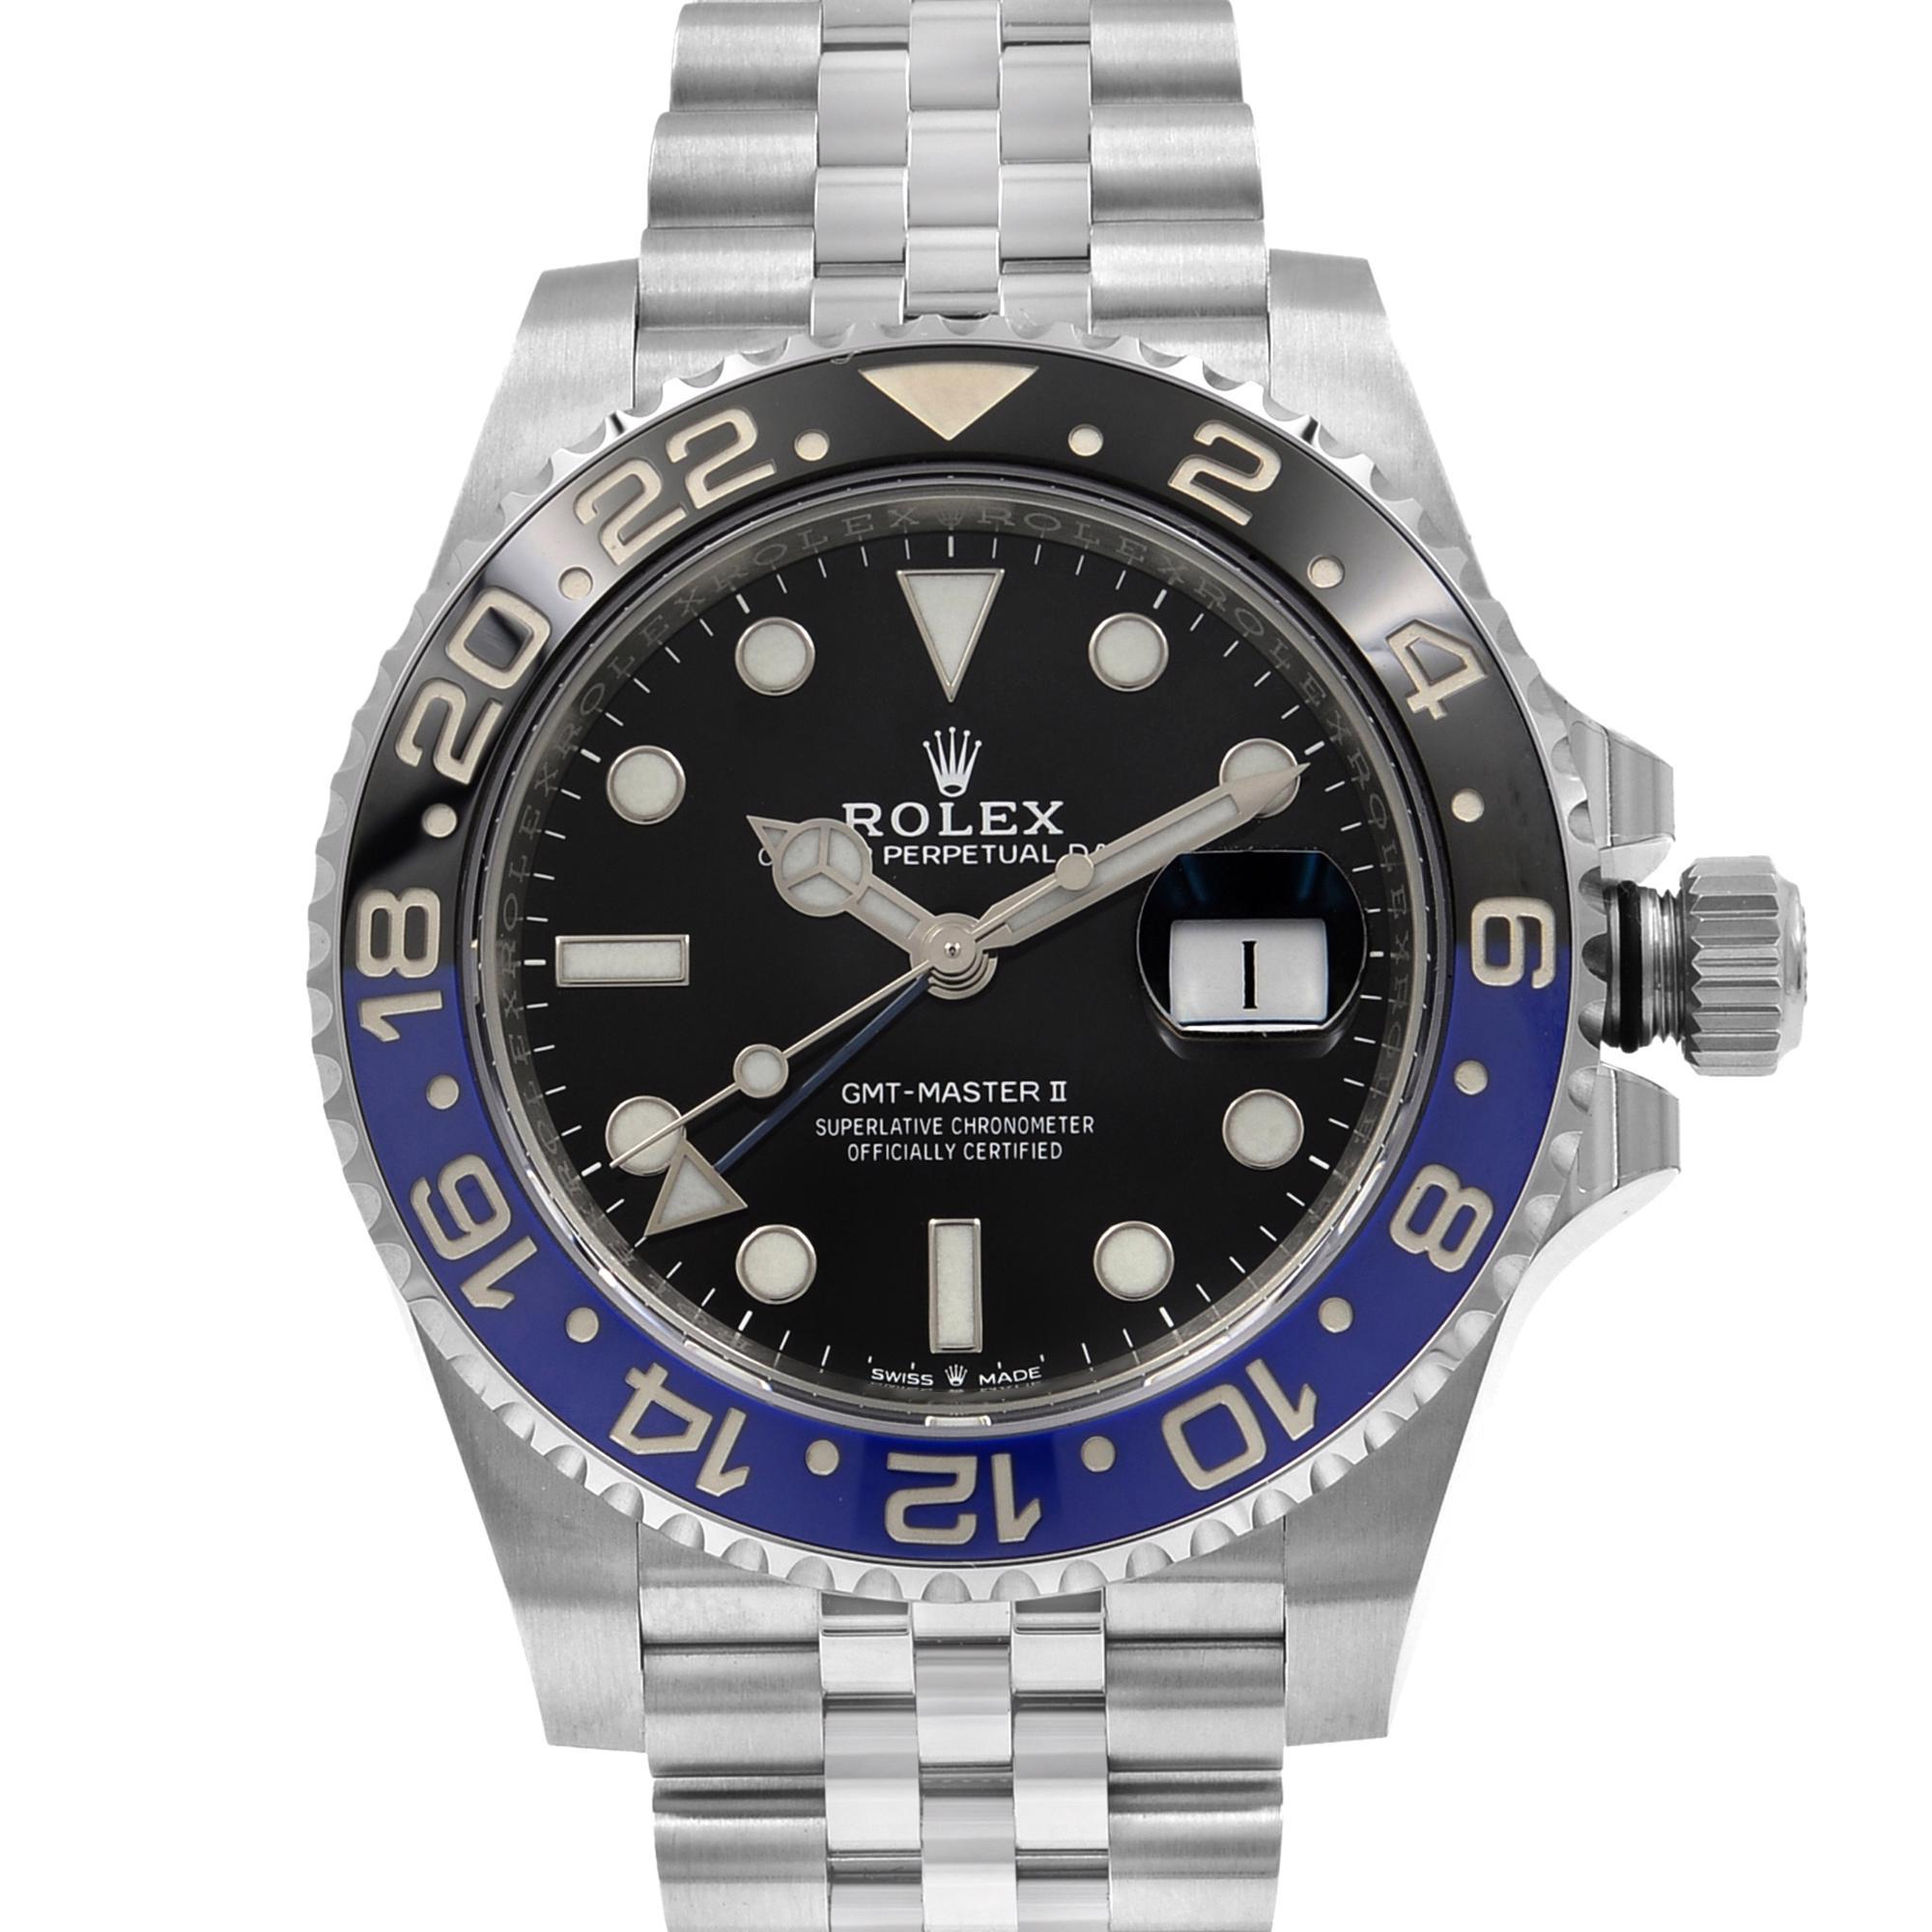 This unworn Rolex GMT-Master II 126710BLNR is a beautiful men's timepiece that is powered by mechanical (automatic) movement which is cased in a stainless steel case. It has a round shape face, date indicator, dual time dial and has sticks and dots